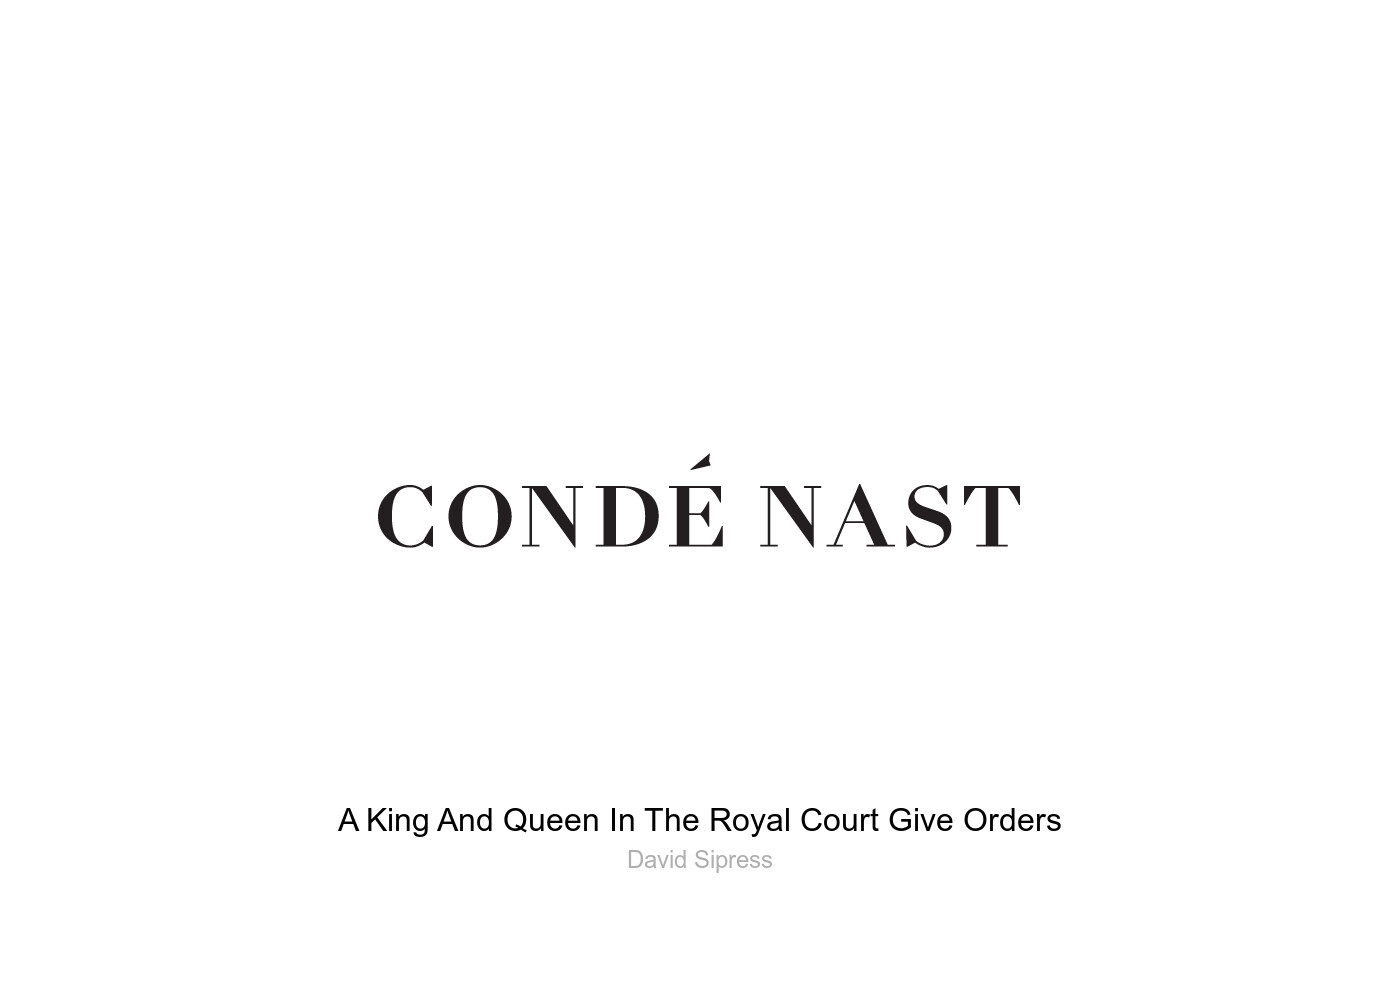 A King And Queen In The Royal Court Give Orders Poster by David Sipress -  Conde Nast